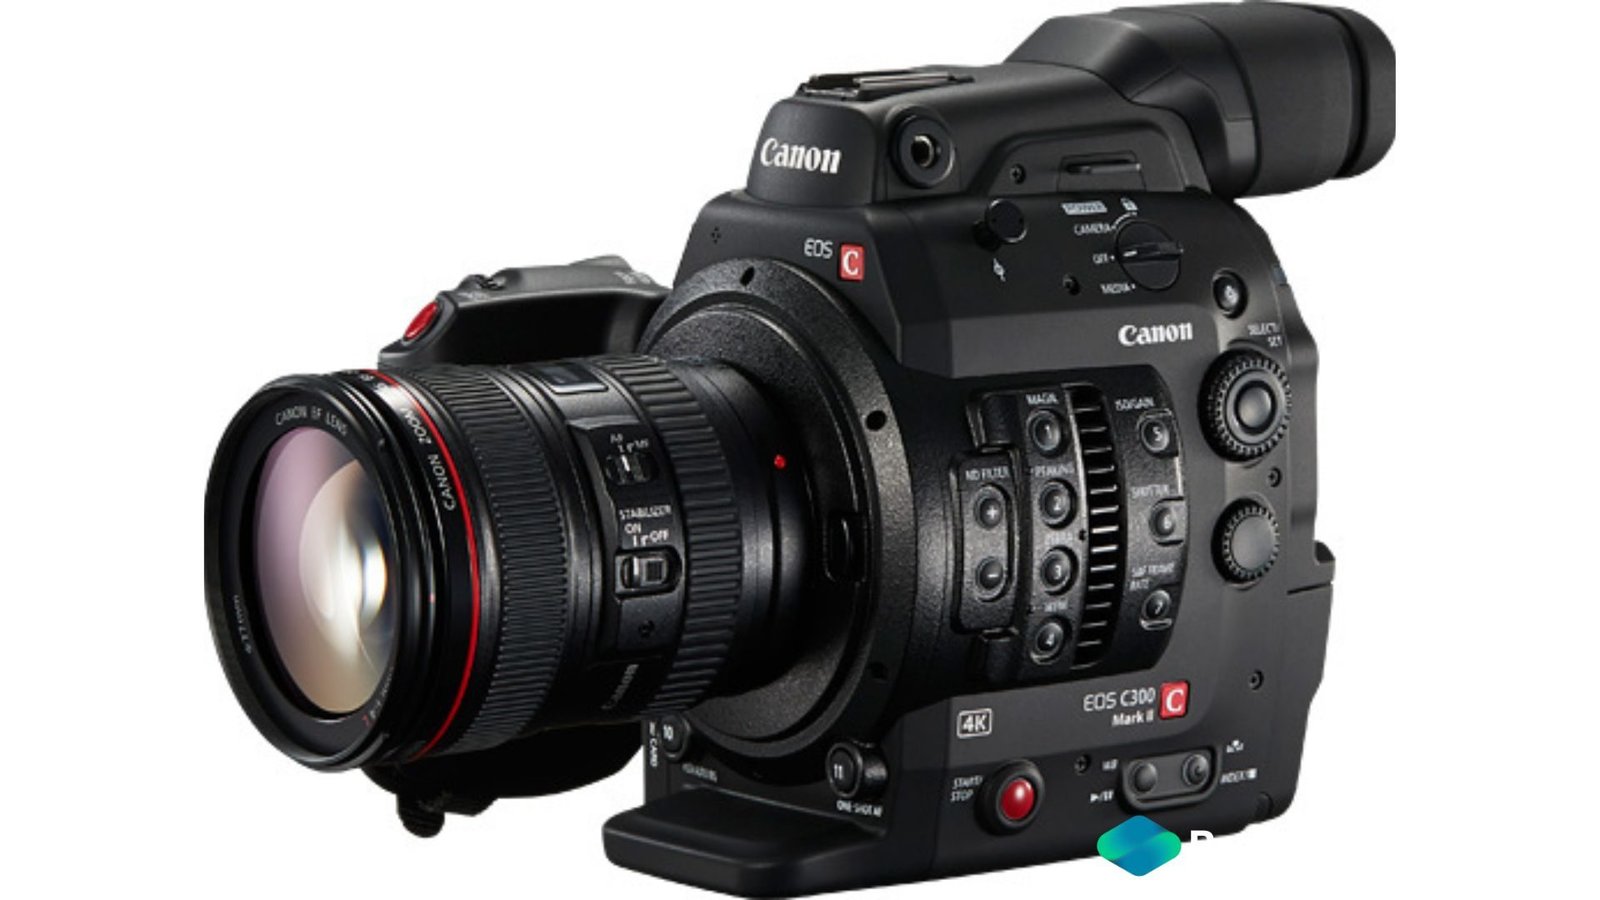 Rent Canon C-300 Mark II Camera With Cp.3 Lens Kit in Delhi NCR, Camera accessories, Camera lenses for rent, in Delhi Gurgaon Noida, hire Shooting equipment, Lighting equipment rental, Film gear rental for Video production, camera rental company in Delhi, film equipment rental company